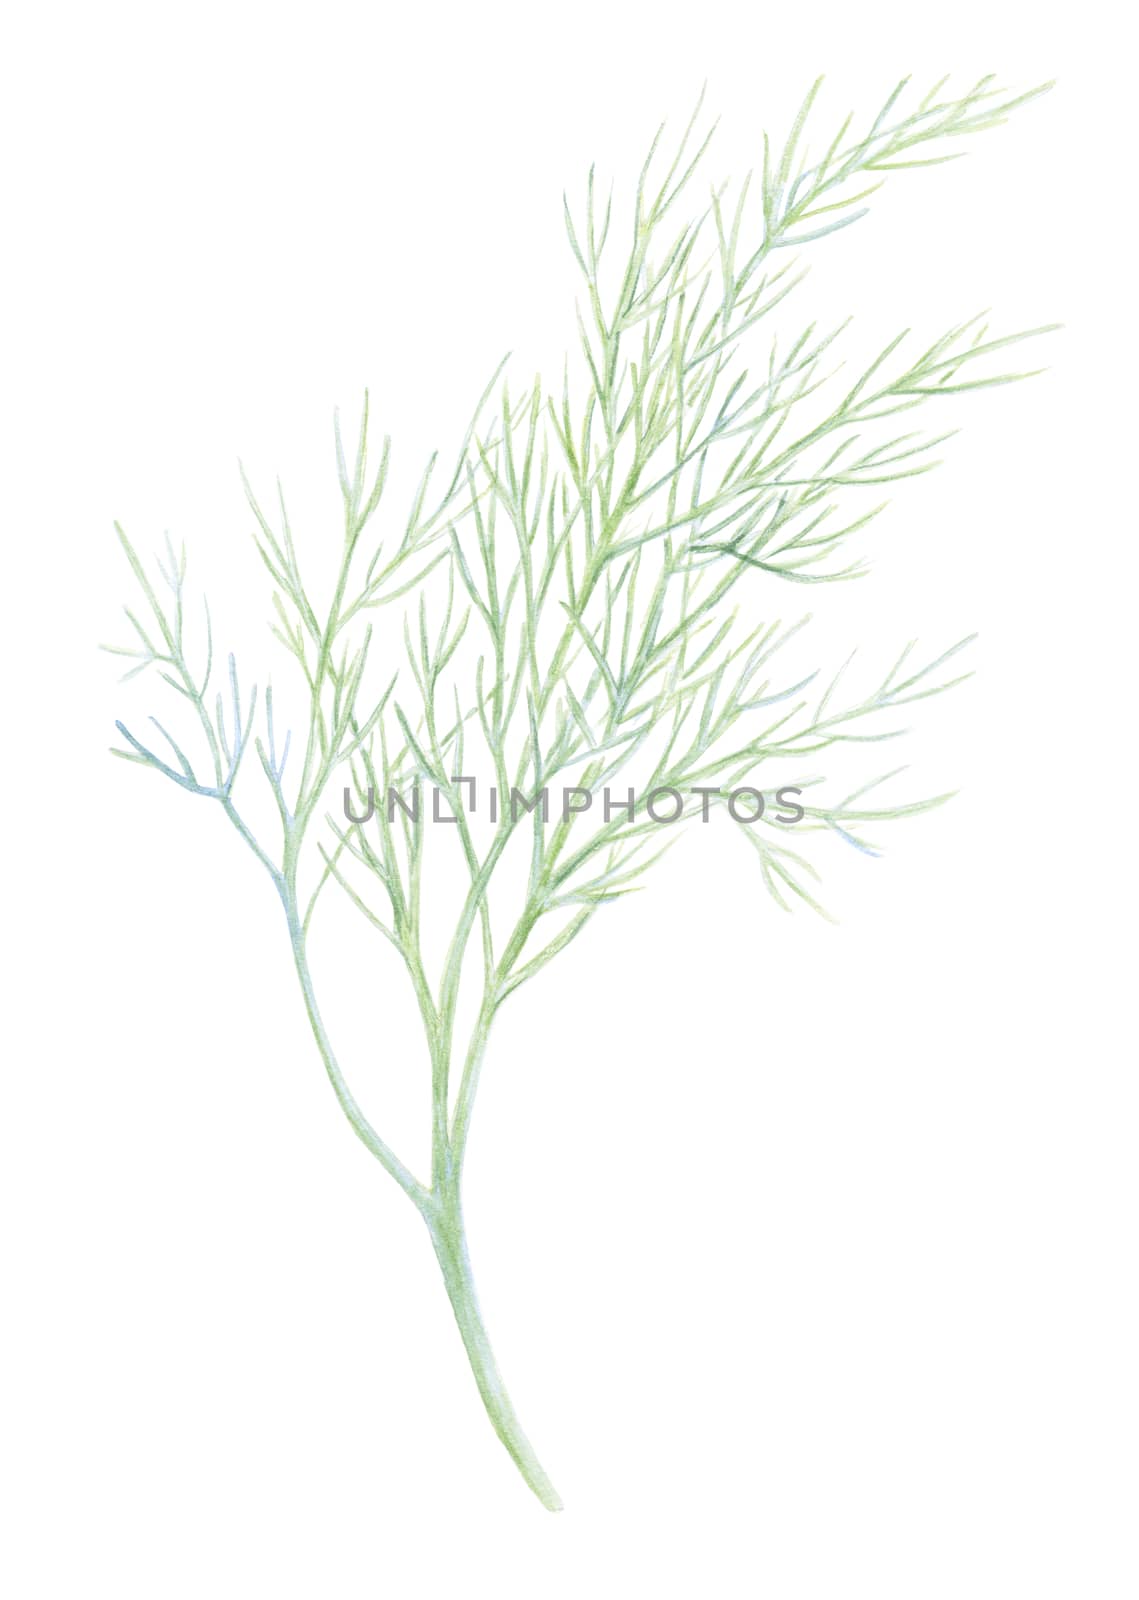 Fresh fennel isolated on white background. Green dill. Watercolor illustration. Realistic botanical art. Hand Drawn. Vegetarian Ingredient. For logo, packaging, print, organic food, market store shop by sshisshka